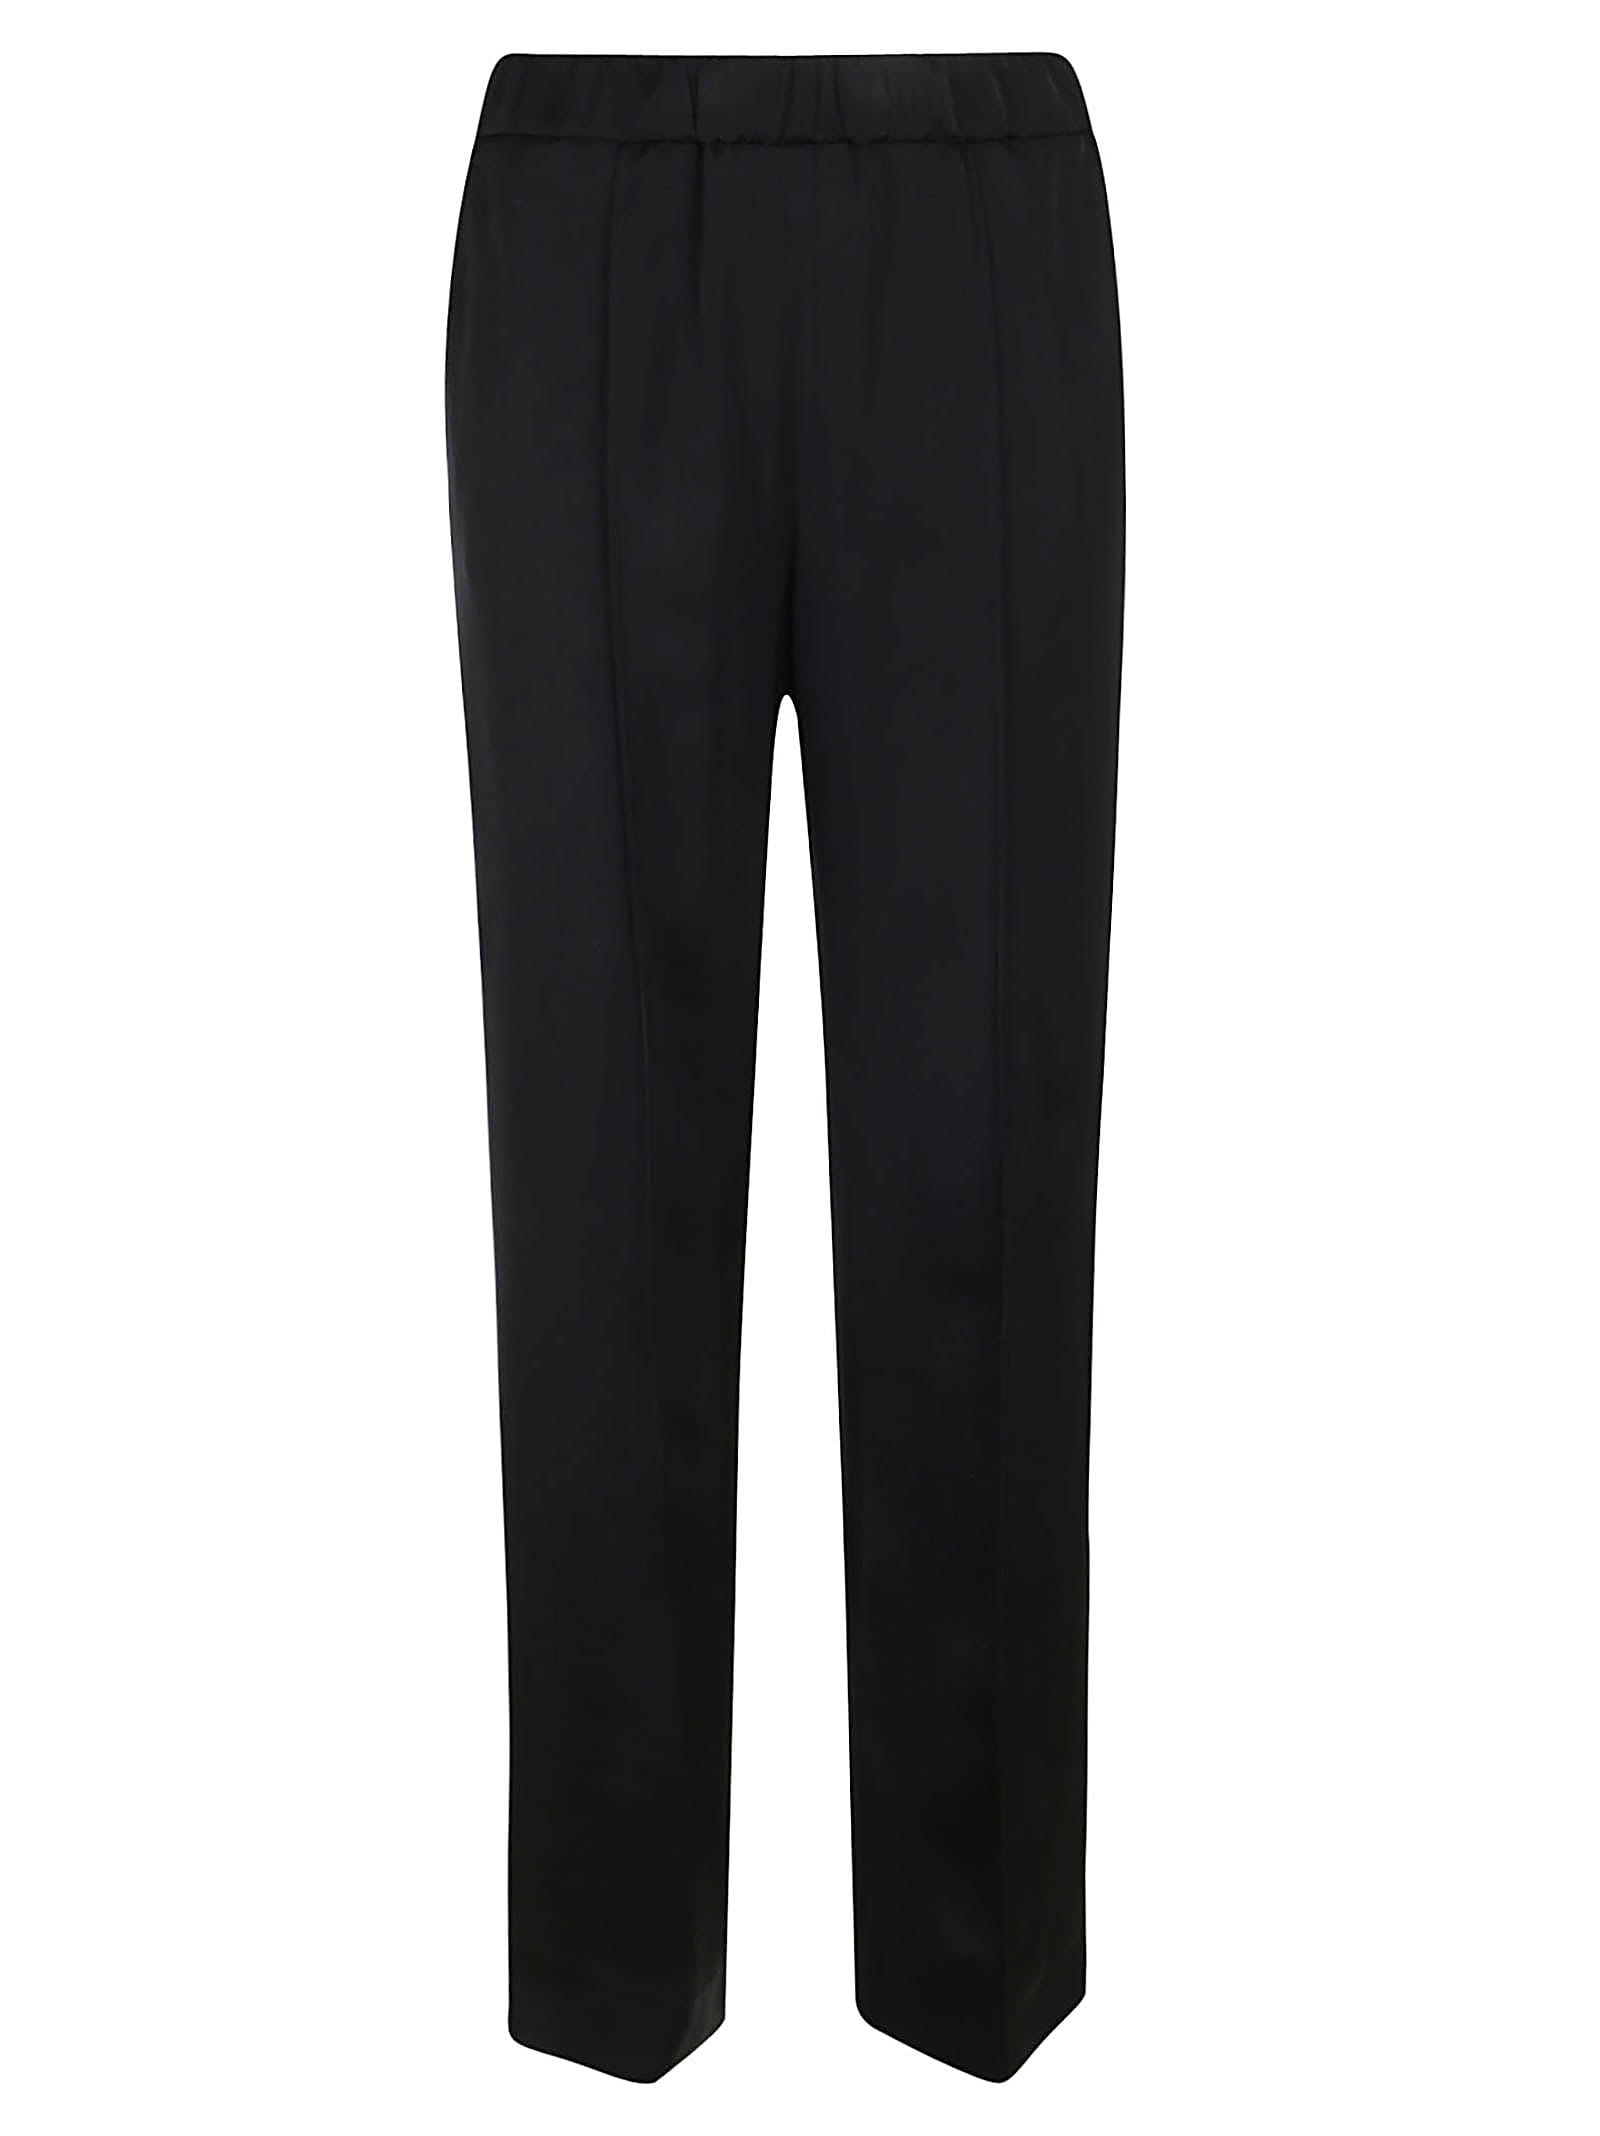 JIL SANDER TRACK INSPIRED RELAXED PANT DOUBLE WITH DRAWSTRING